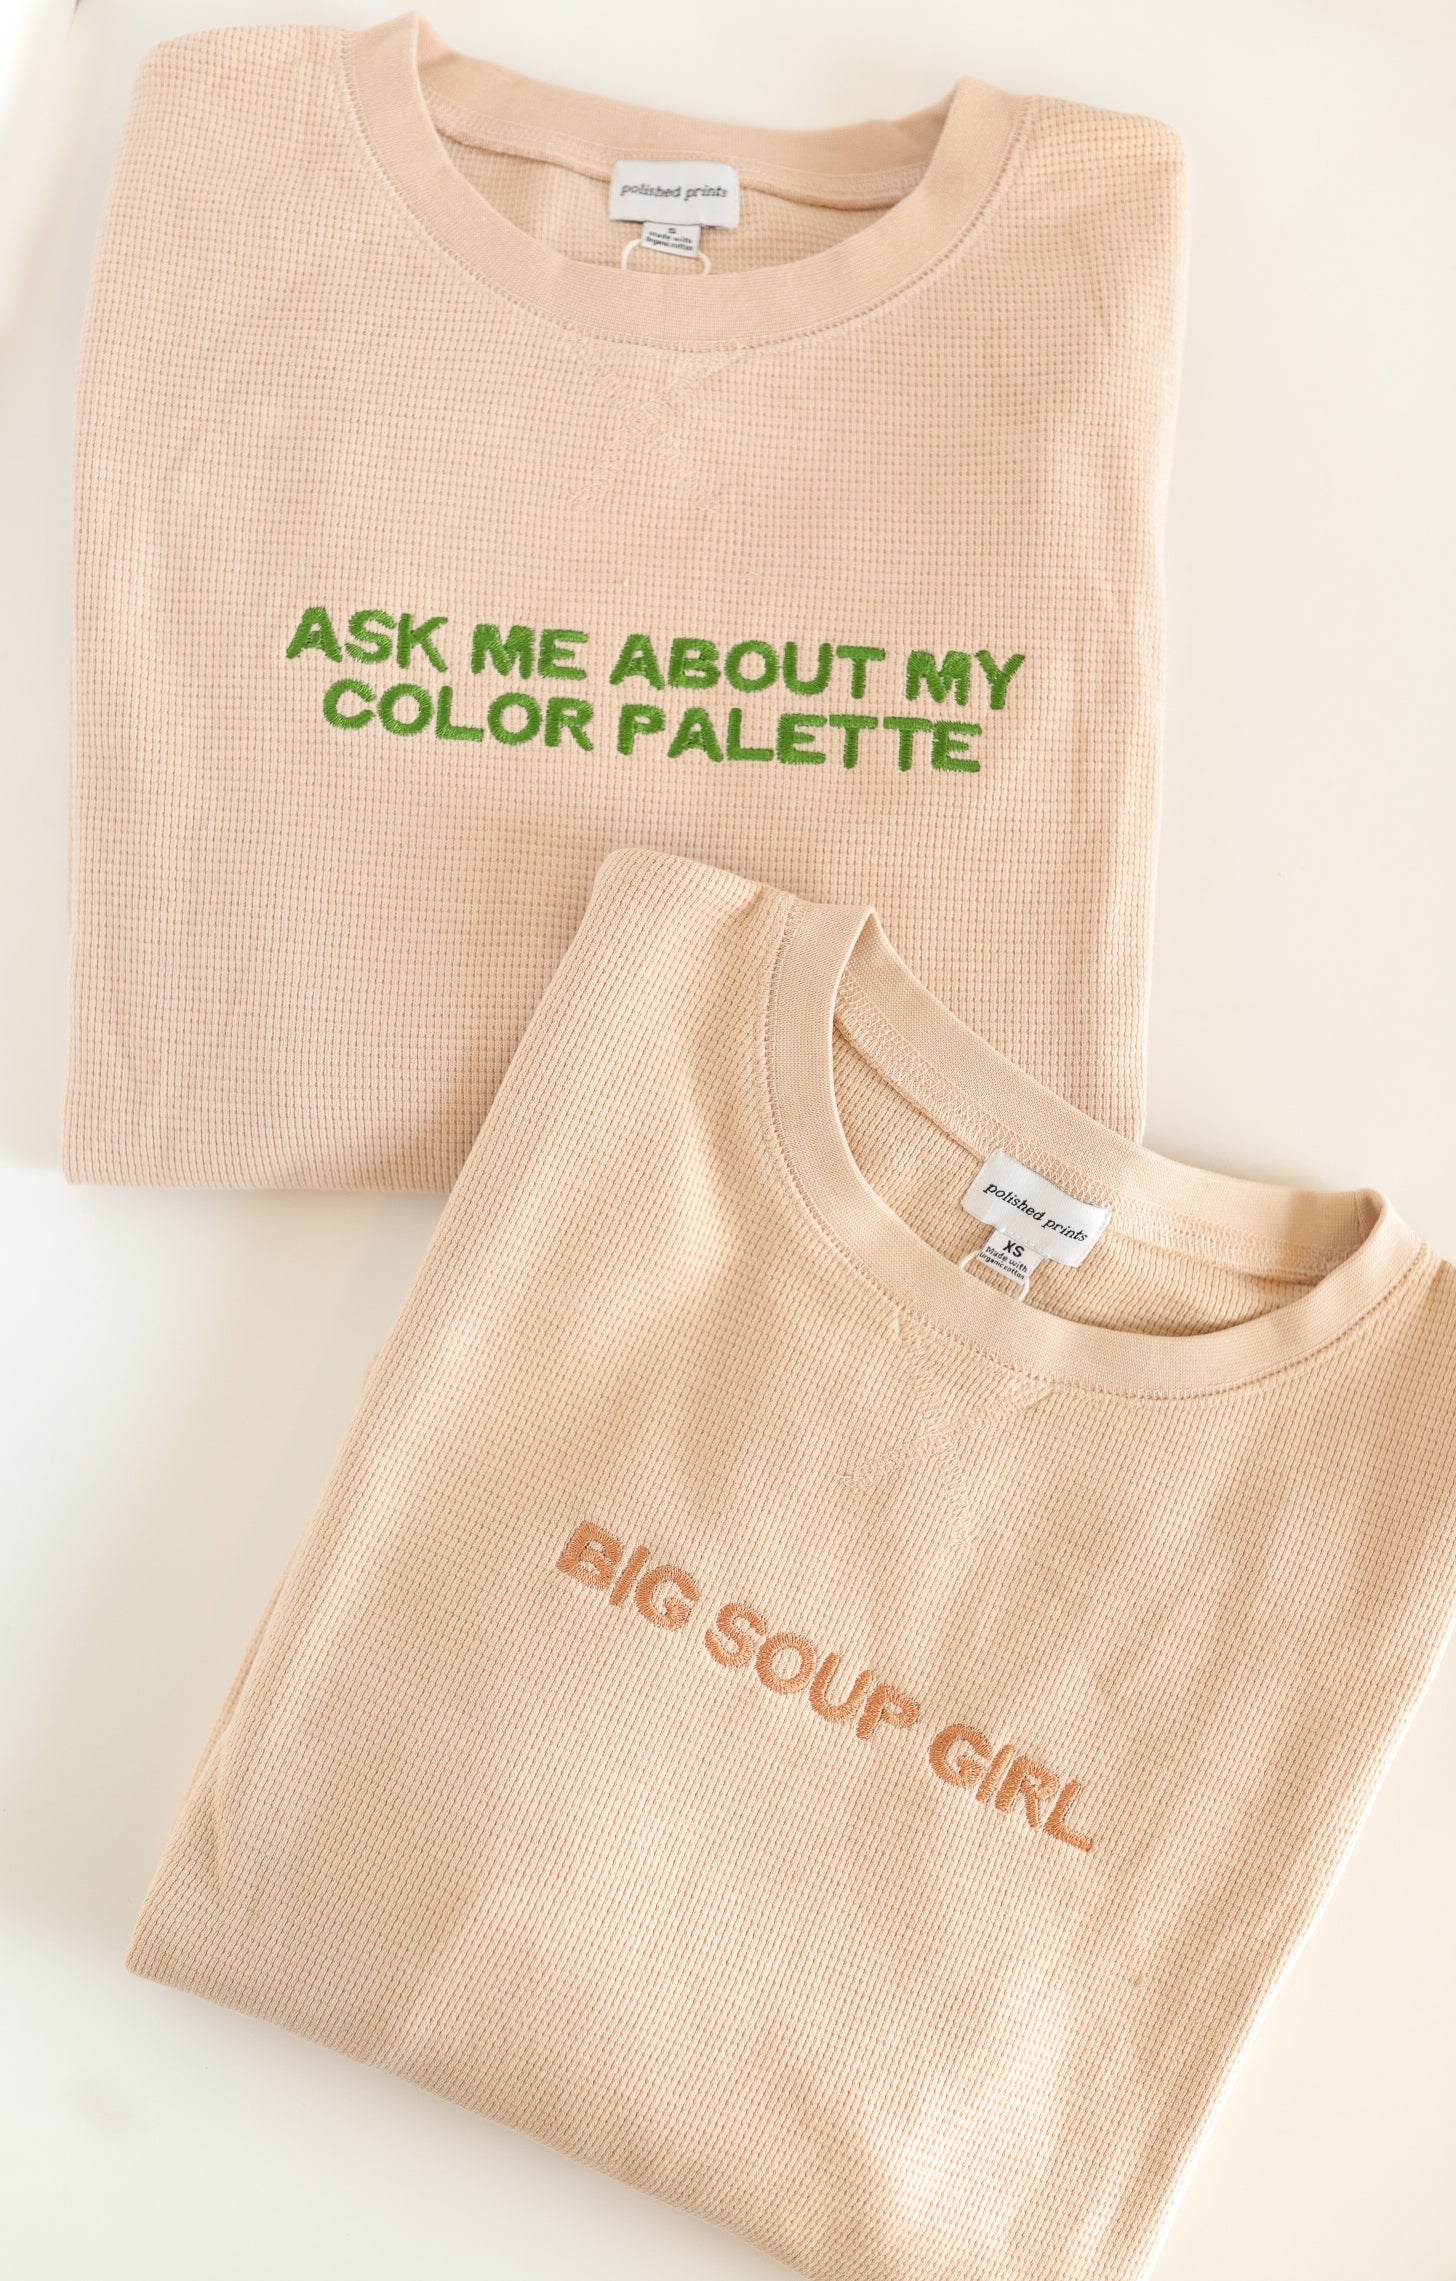 Big Soup Girl | Embroidered Waffle Pullover